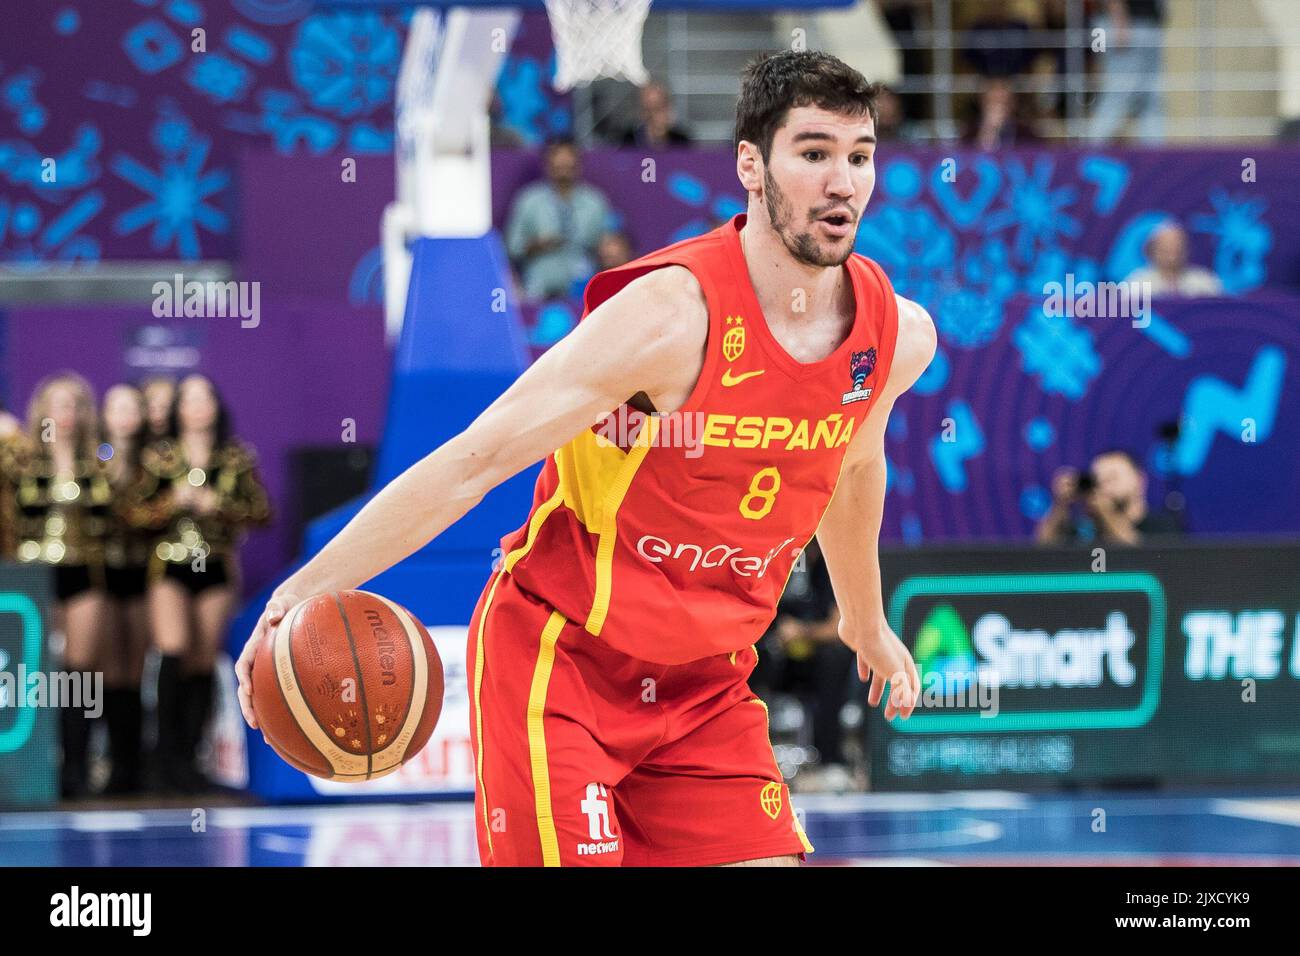 Tbilisi, Georgia, 6th September 2022. Dario Brizuela of Spain in action during the FIBA EuroBasket 2022 group A match between Montenegro and Spain at Tbilisi Arena in Tbilisi, Georgia. September 6, 2022. Credit: Nikola Krstic/Alamy Stock Photo